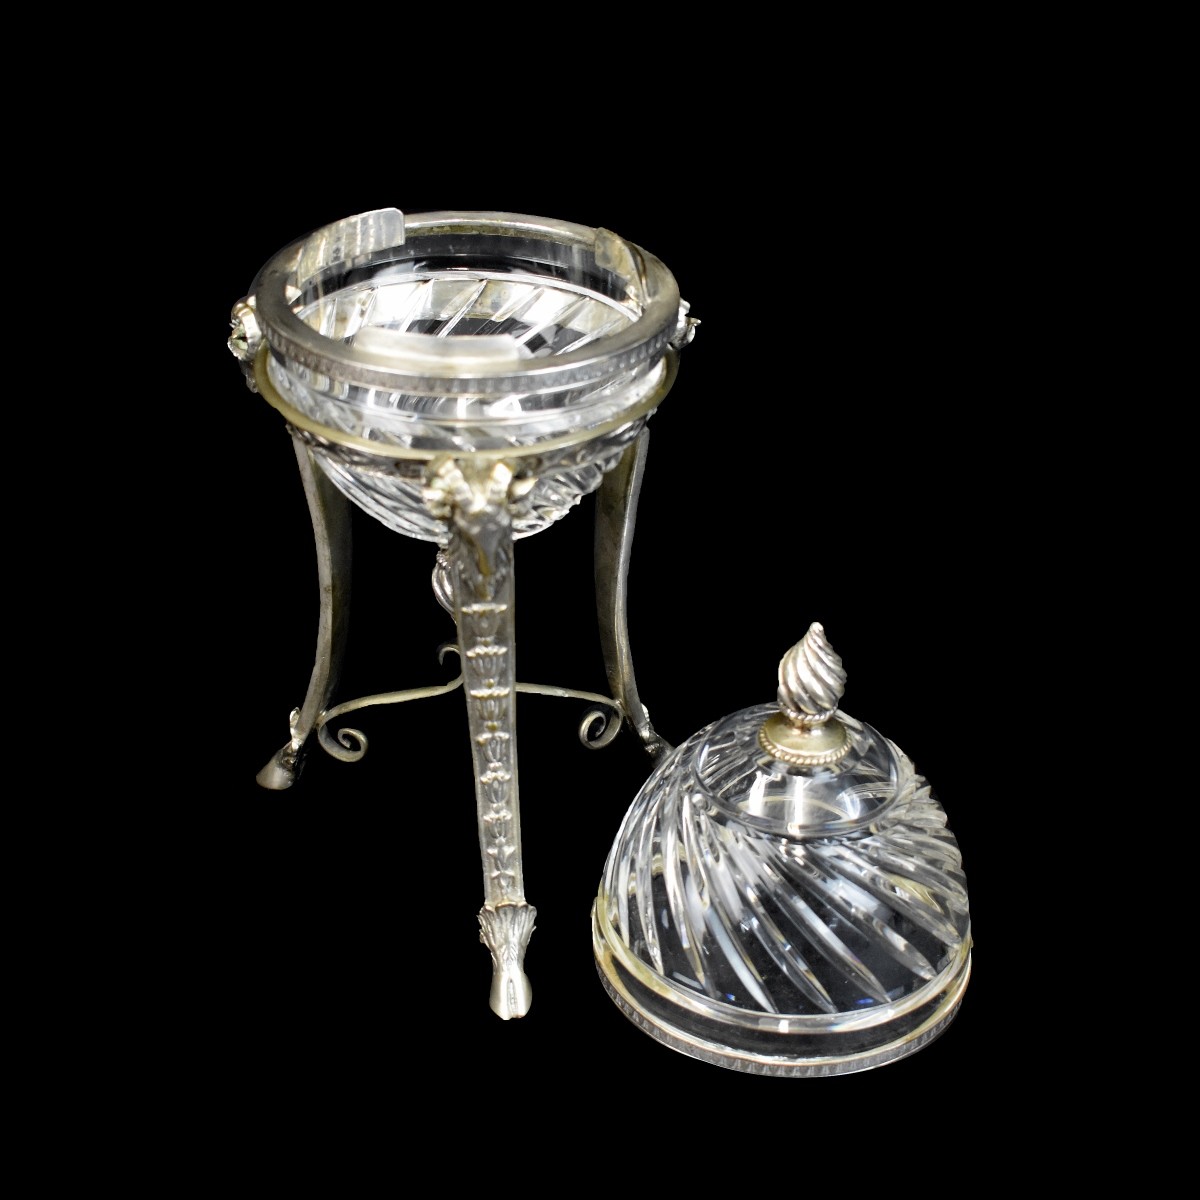 Assorted Tableware Dome Server and Lladro